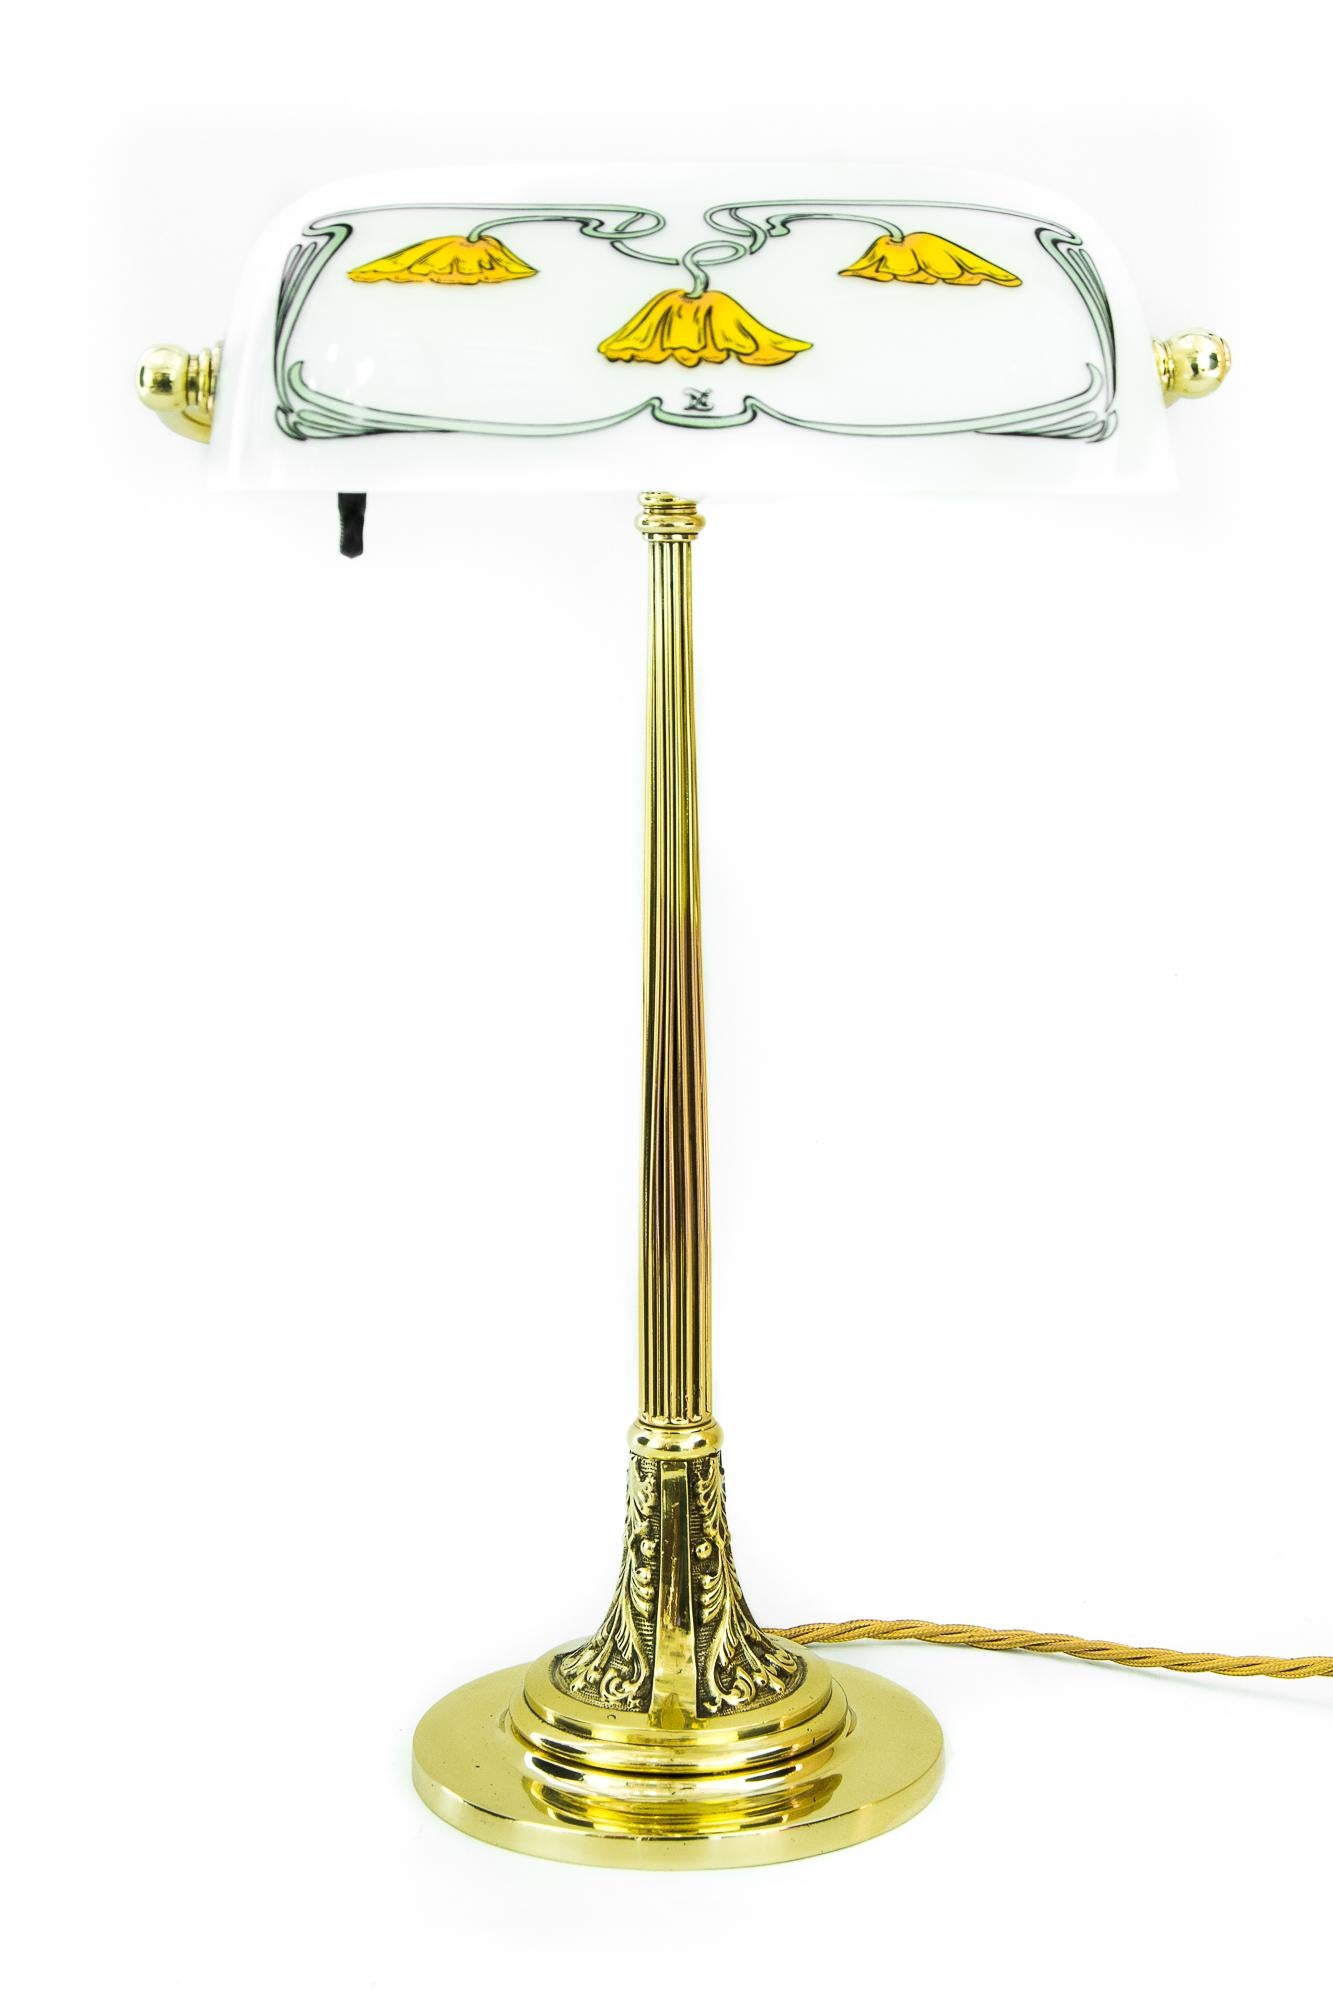 Austrian Jugendstil Table Lamp with New Glass Shade, Vienna, circa 1908 For Sale